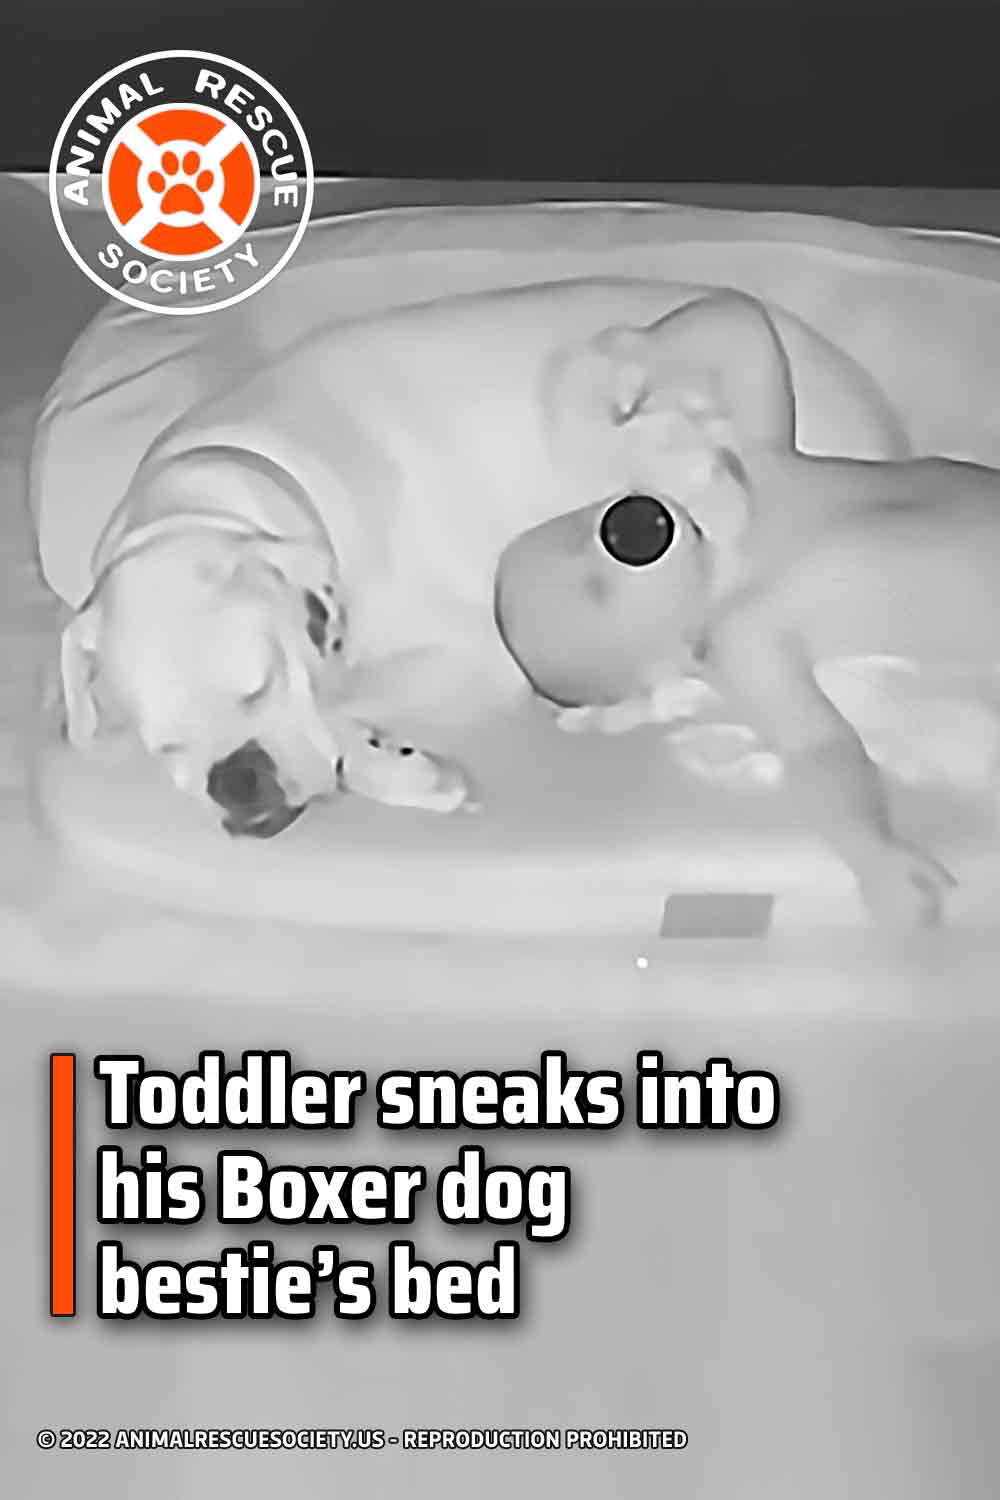 Toddler sneaks into his Boxer dog bestie’s bed